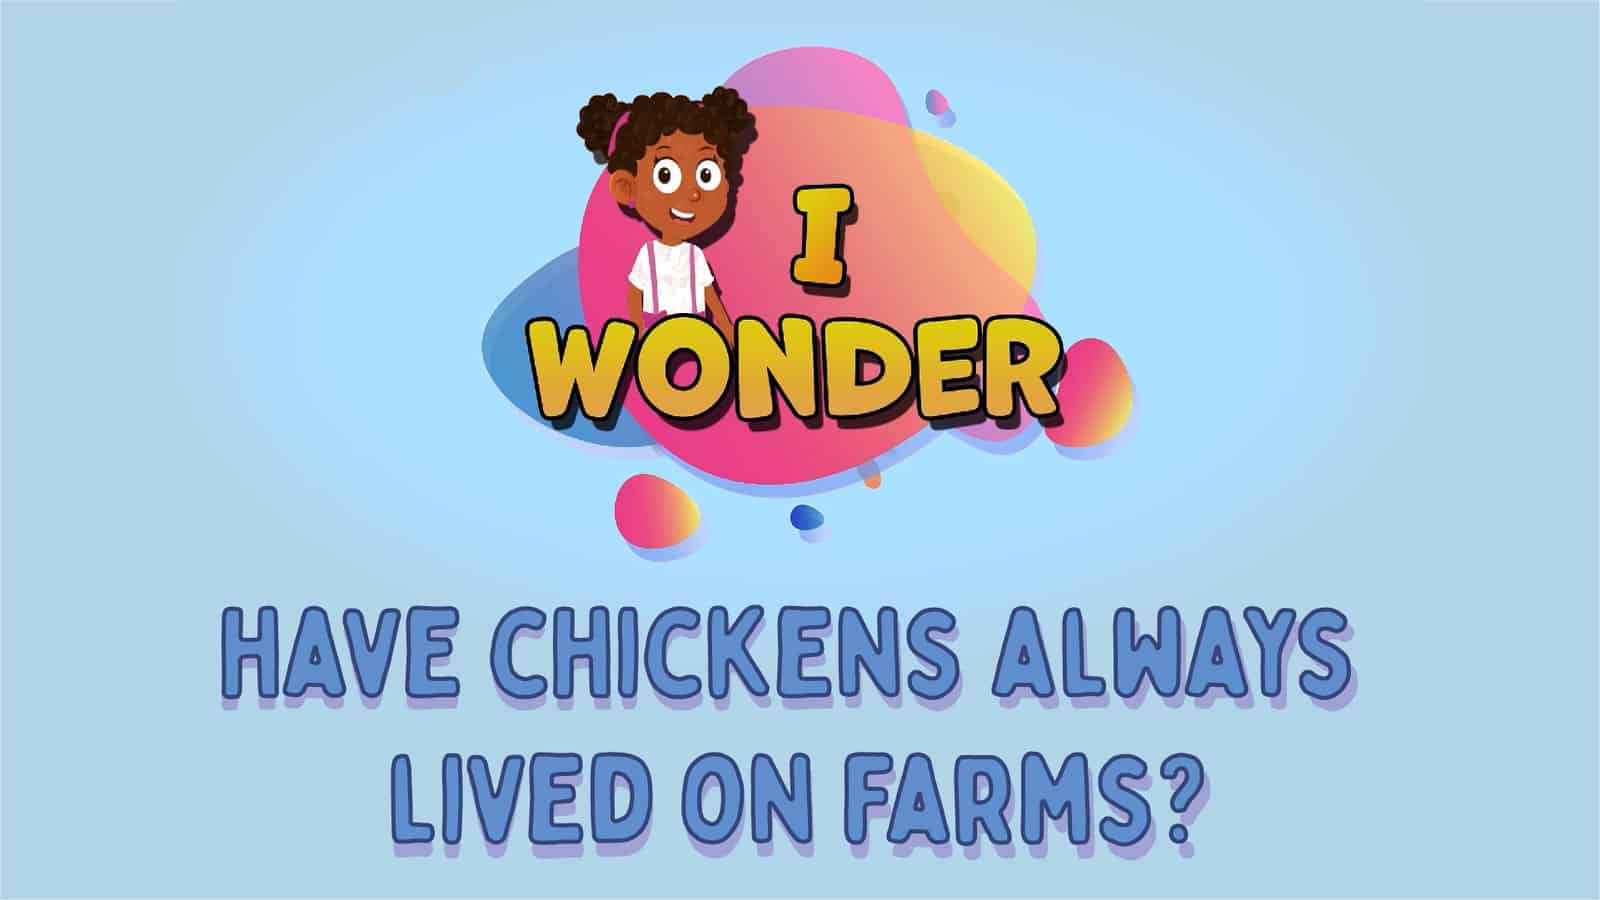 Have Chickens Always Lived On Farms?